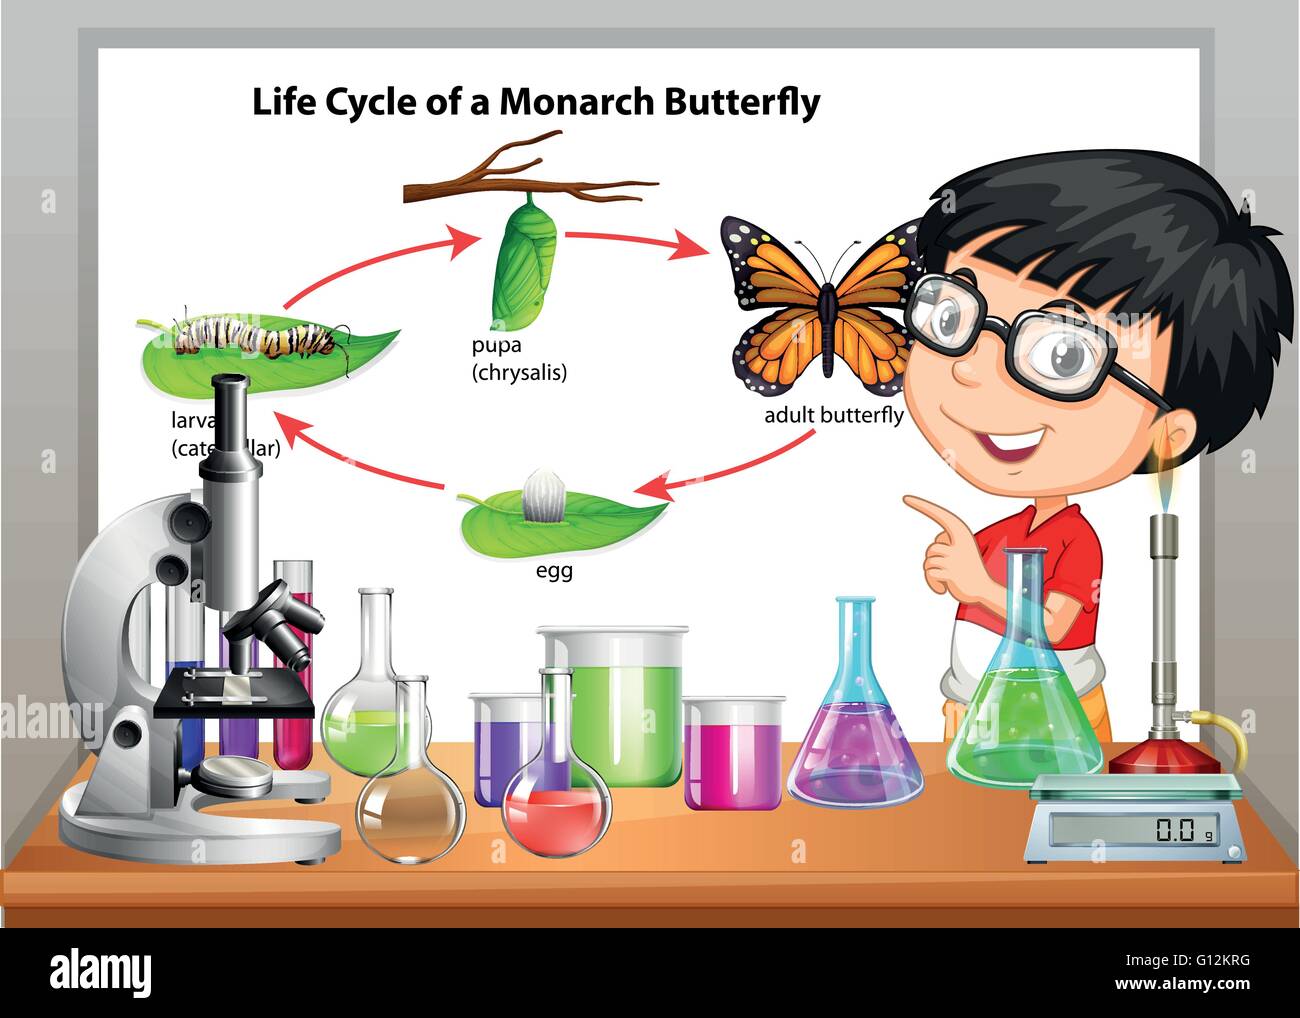 Boy presenting life cycle of butterfly illustration Stock Vector